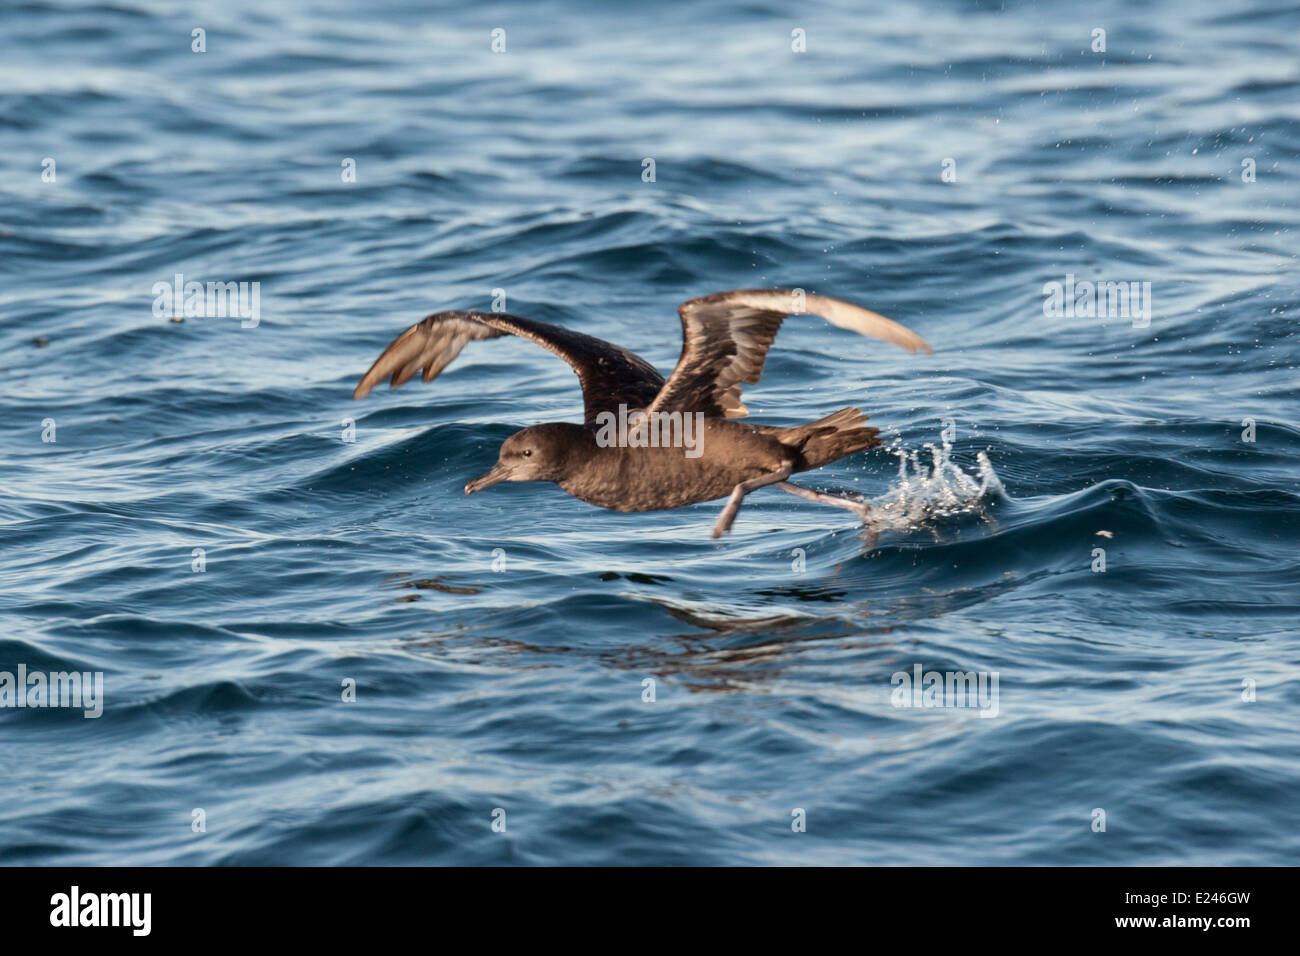 Sooty shearwater, Puffinus griseus, taking off, Monterey, California, Pacific Ocean. Stock Photo